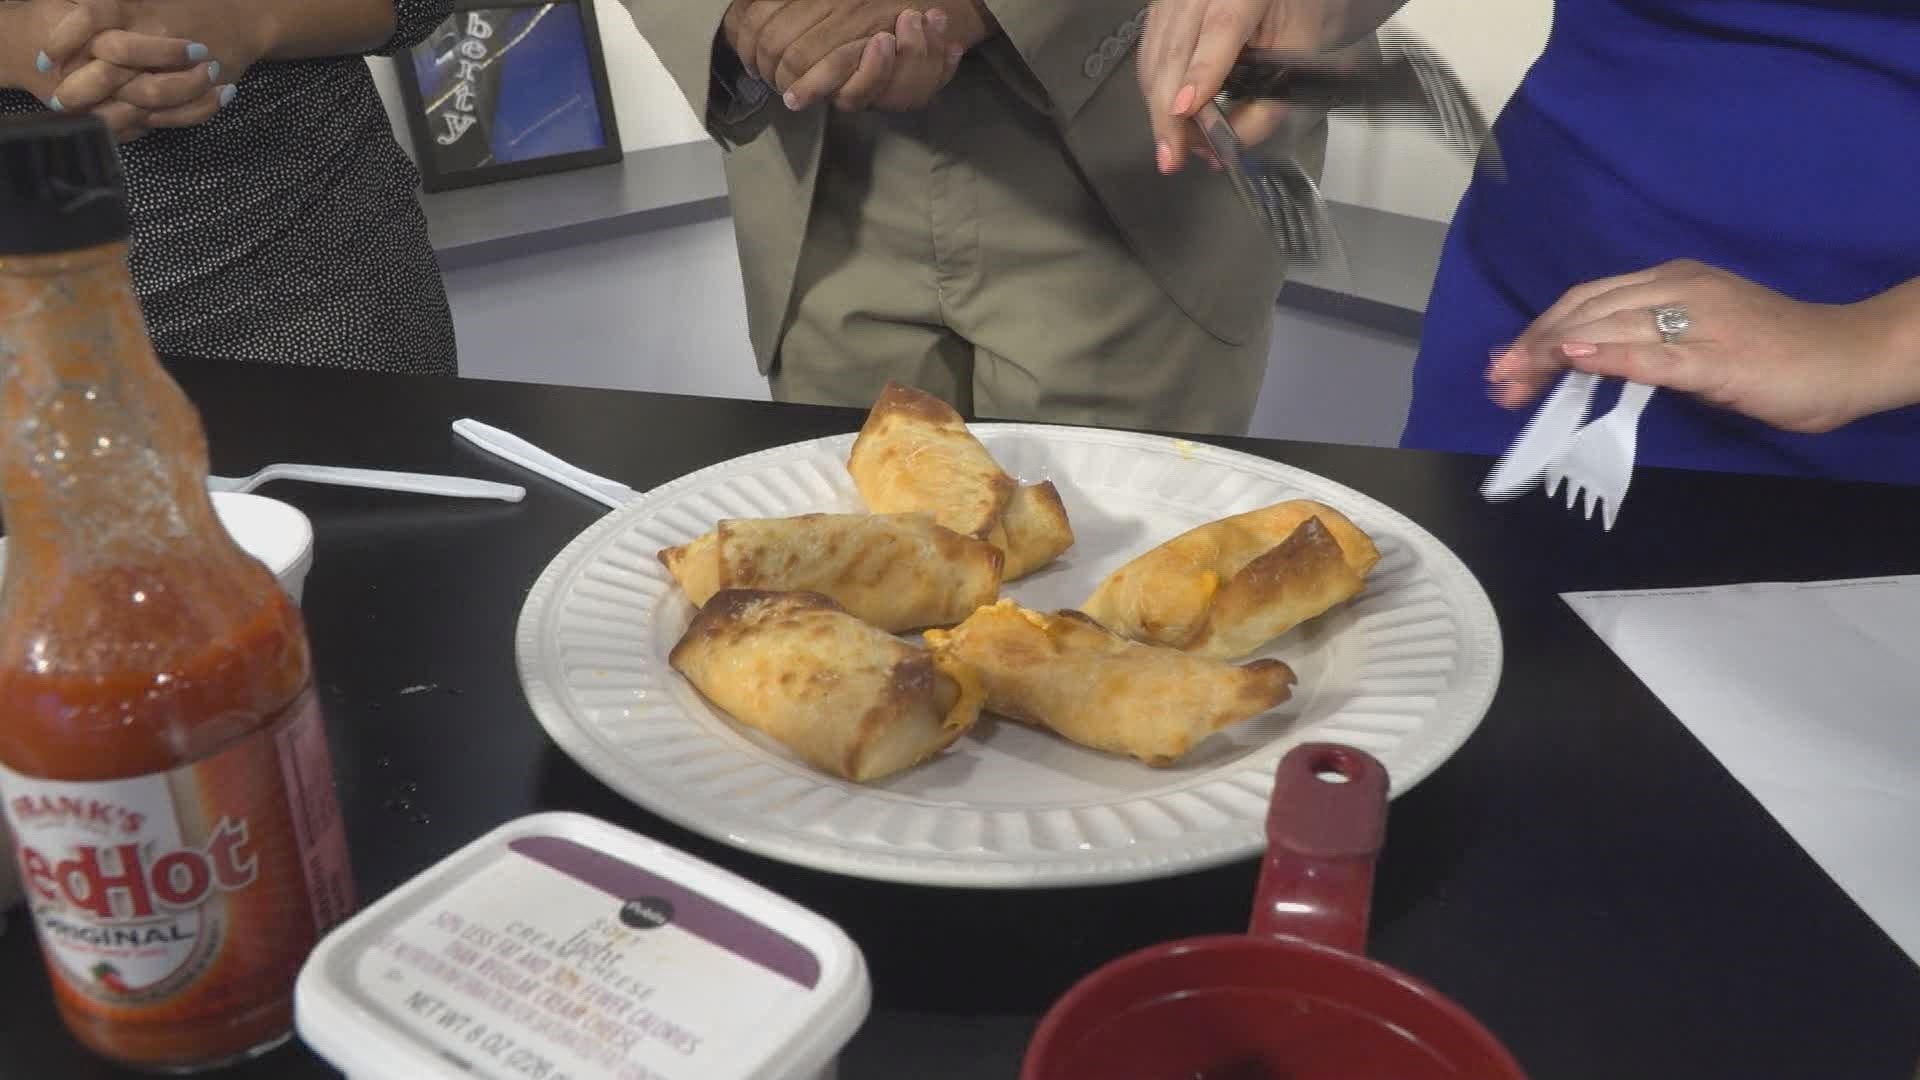 Andrea Mock shows how to make this tasty dish: chicken buffalo egg rolls.